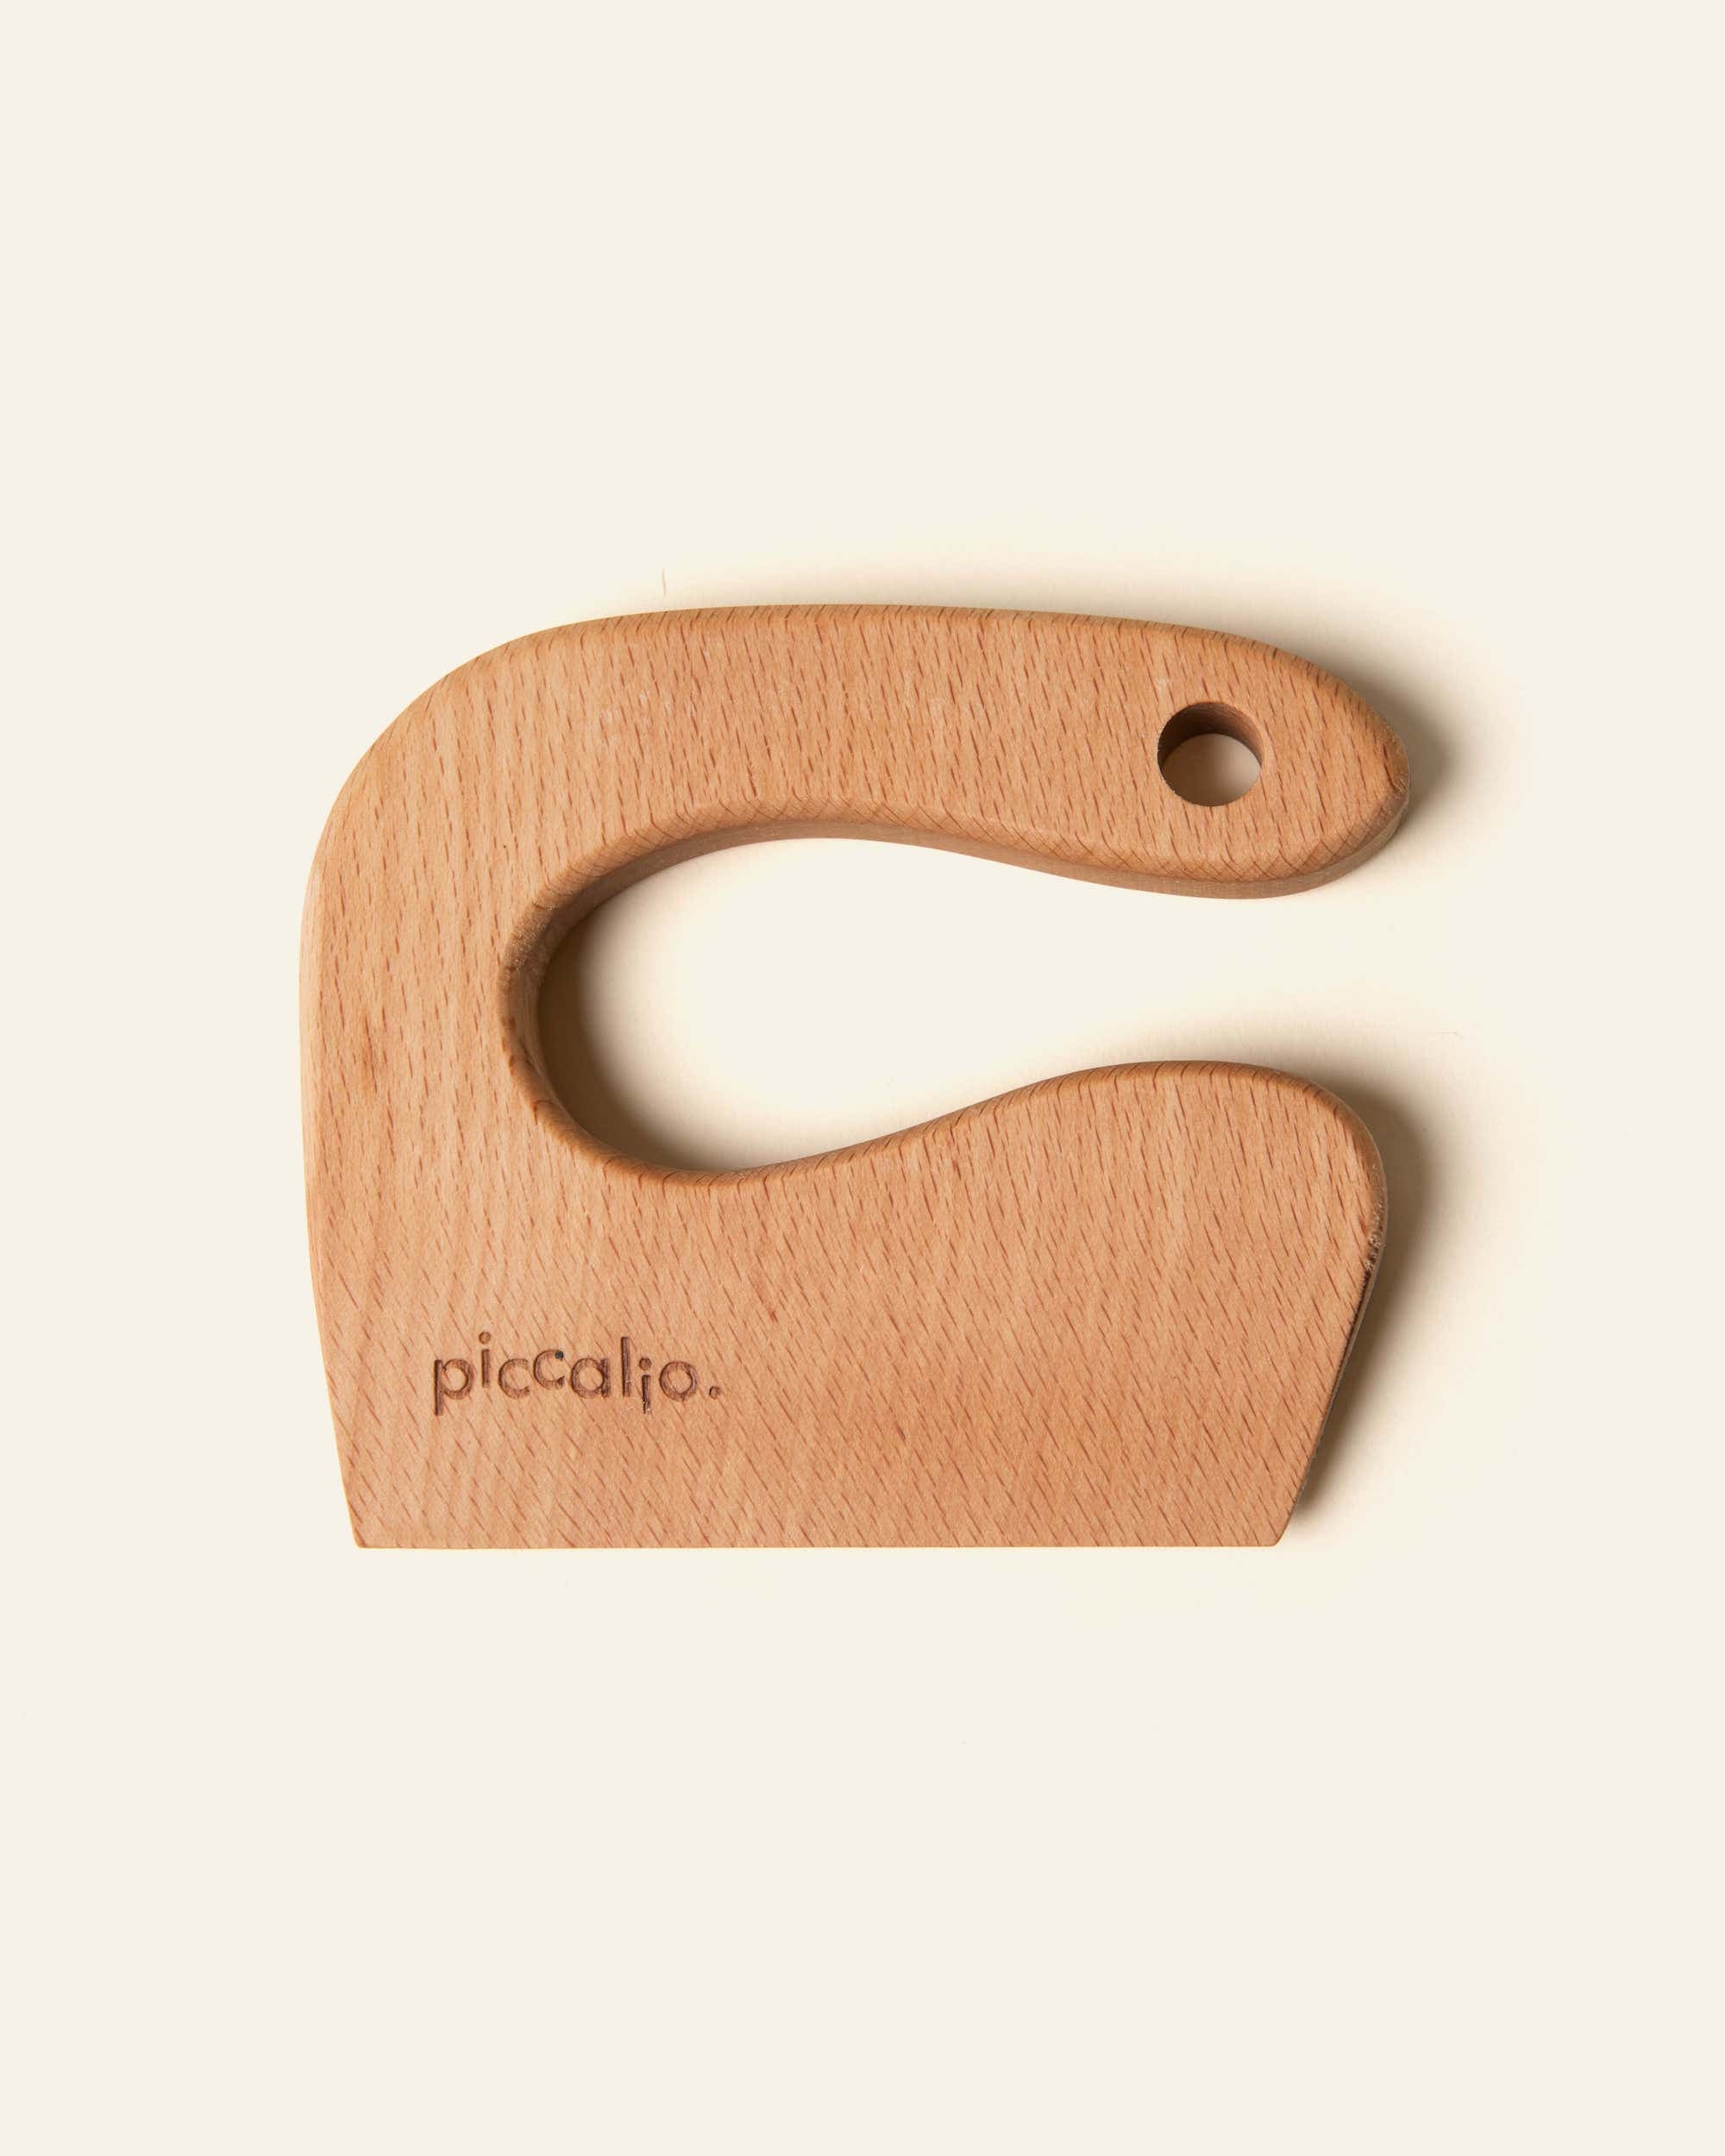 Mini Cutter Kids Knife by Piccalio - Smart Wooden Play